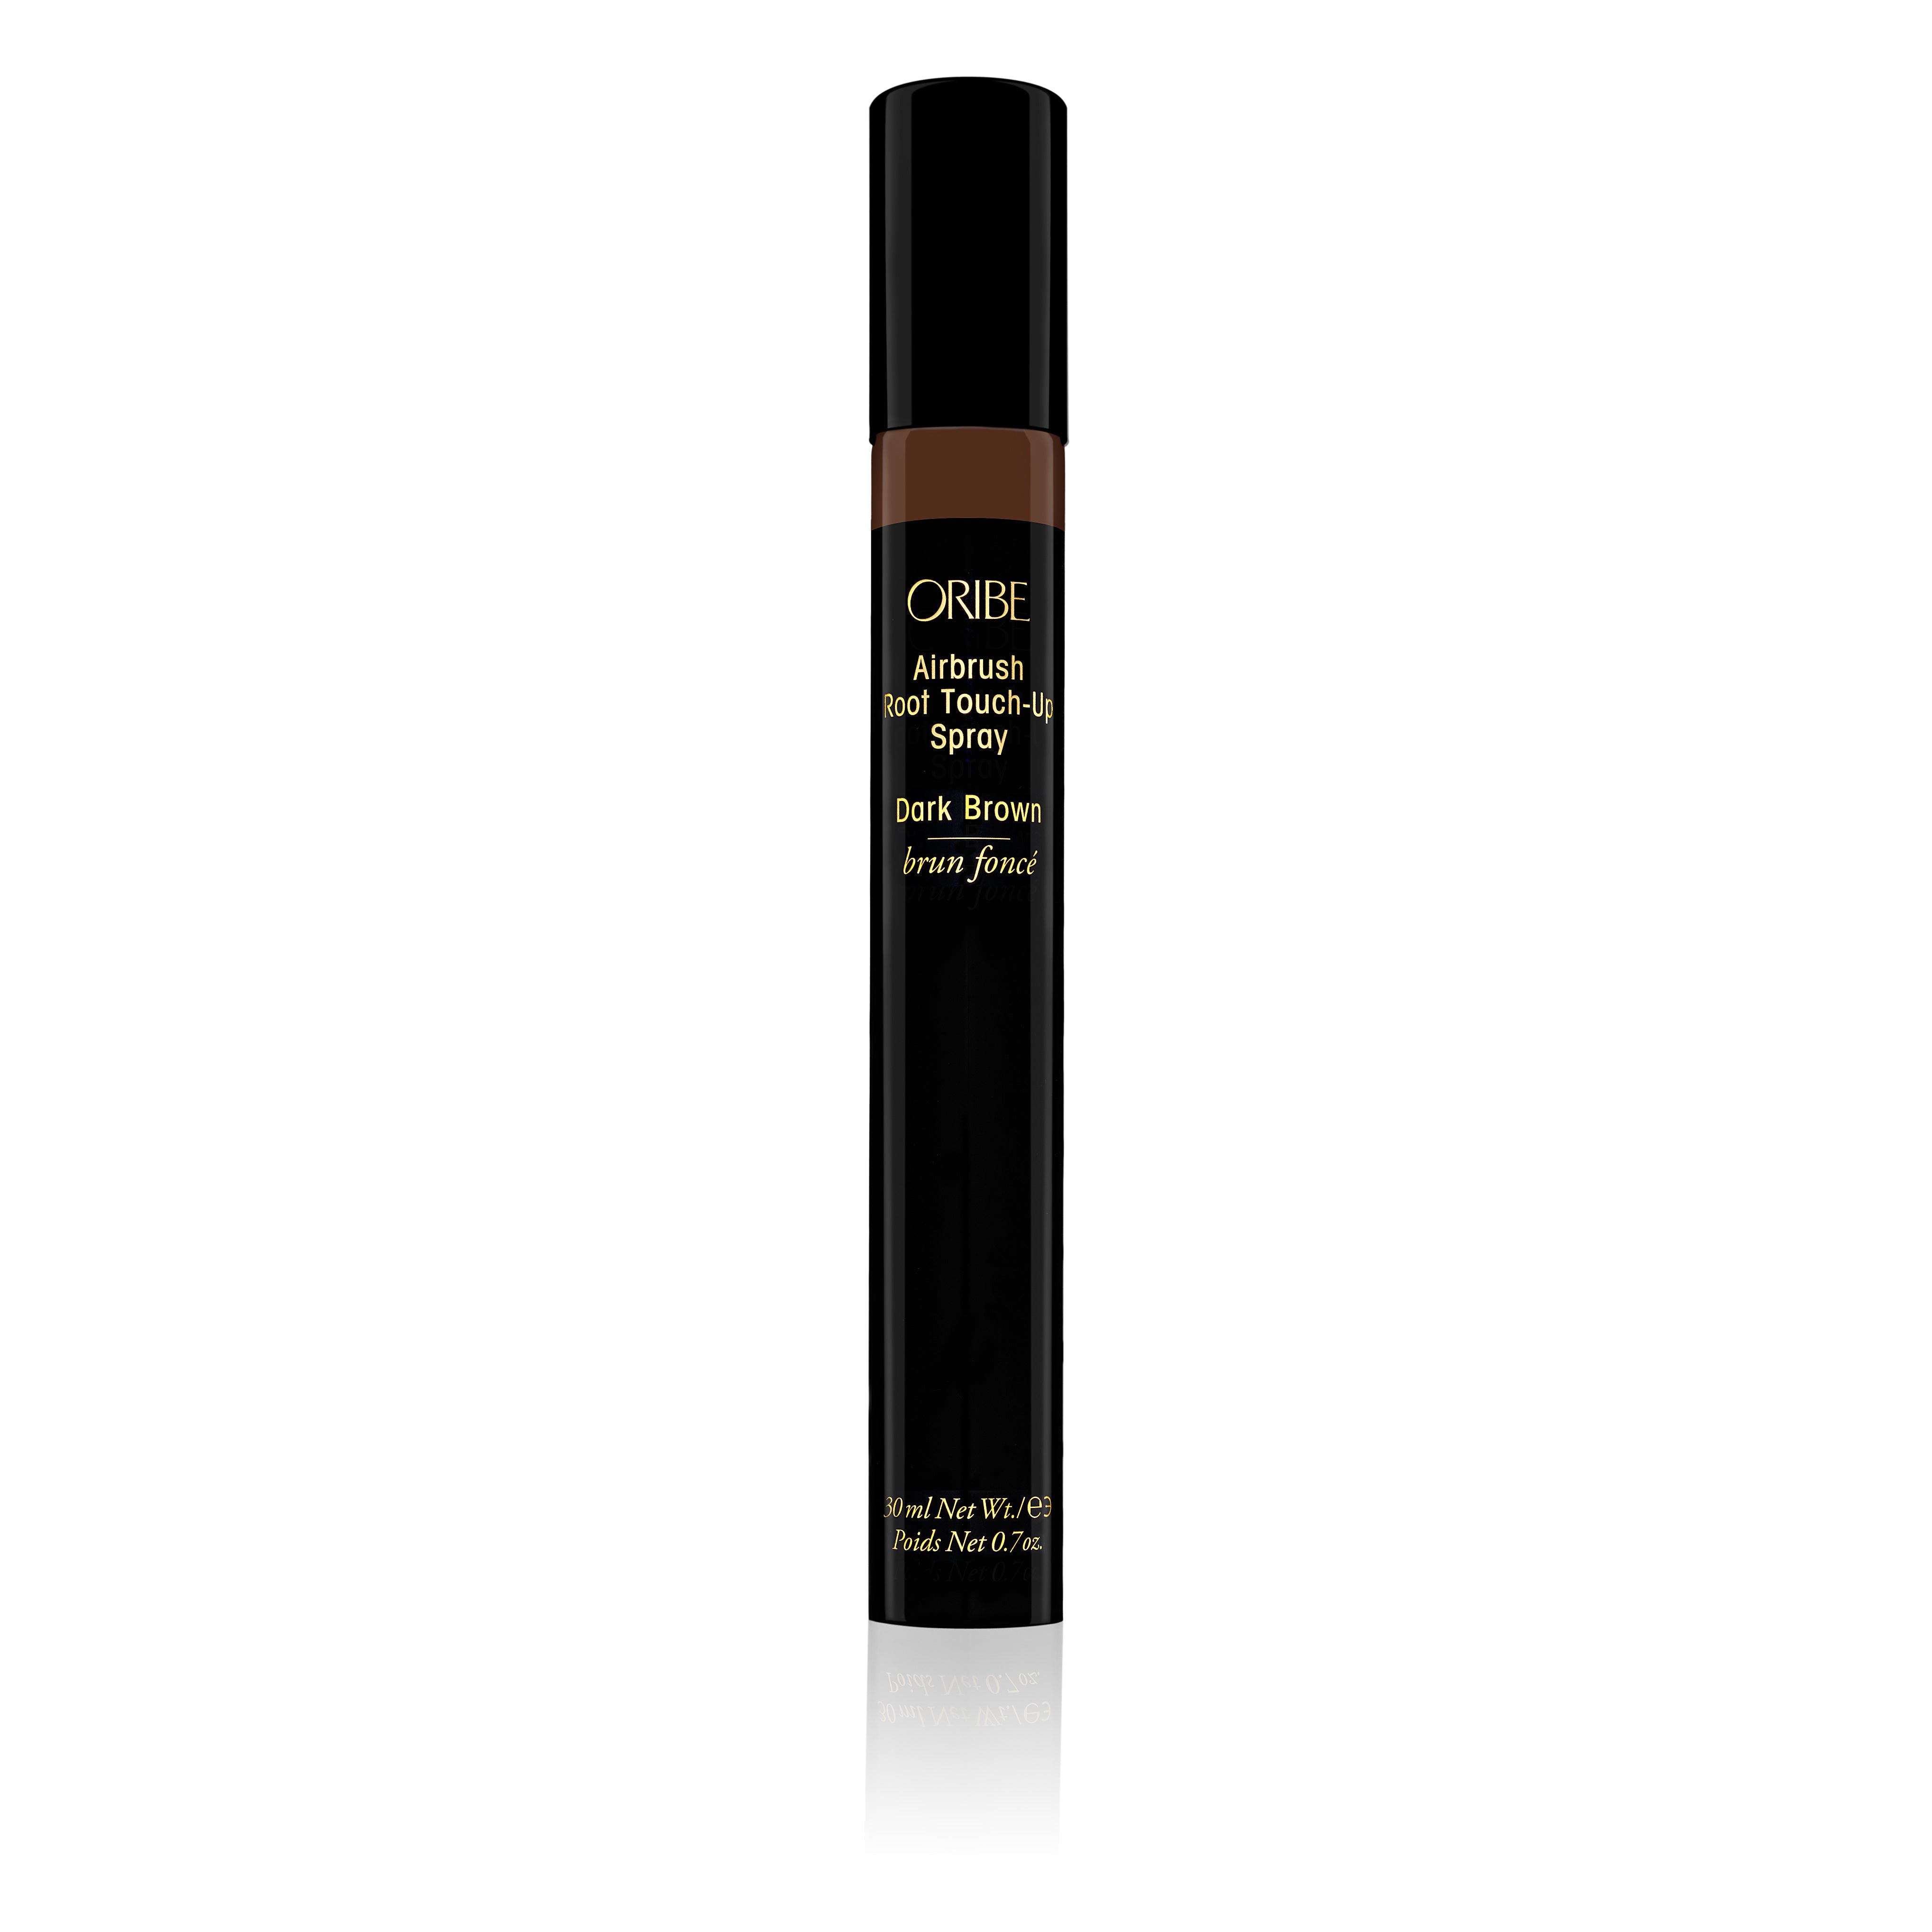 Airbrush Root Touch-Up Spray by Oribe - Dark Brown